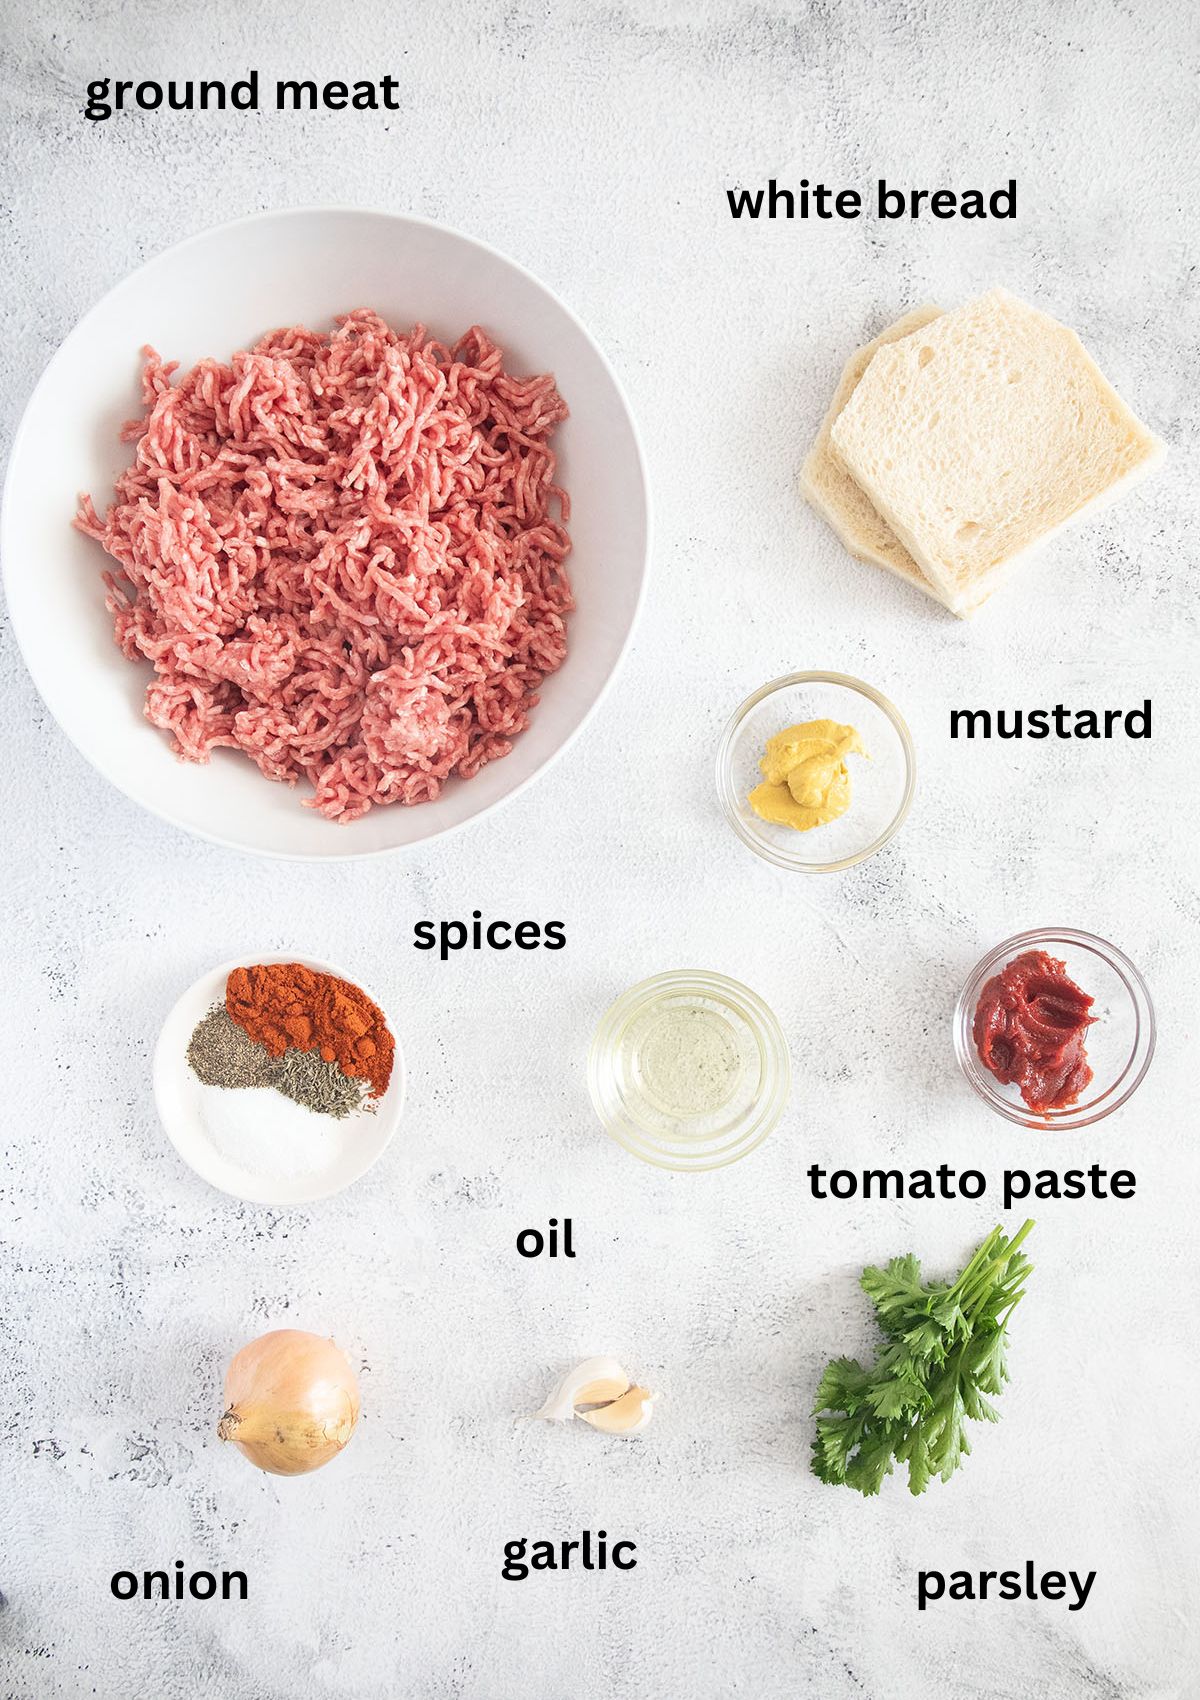 labeled ingredients for making meatballs without eggs with white bread, spices, parsley and mustard.